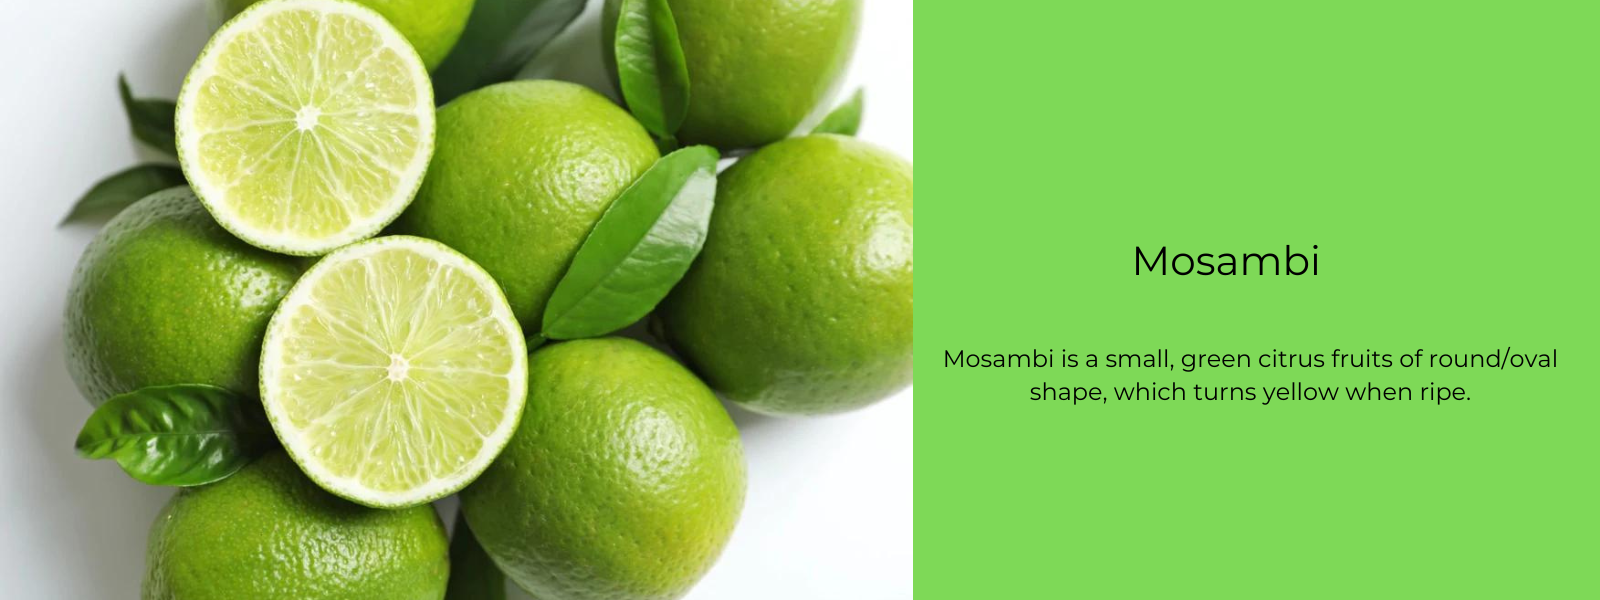 Mosambi - Health Benefits, Uses and Important Facts